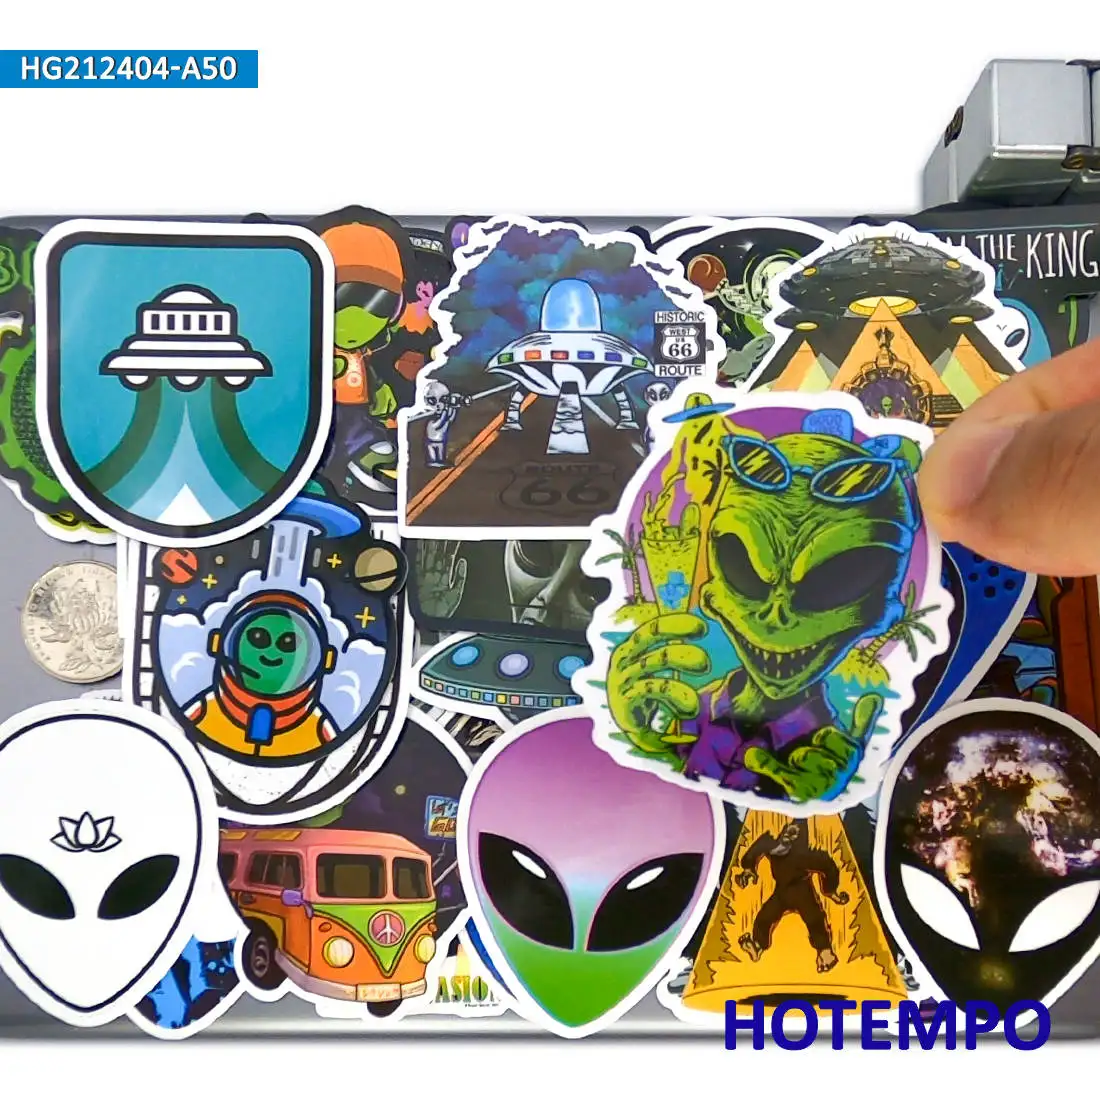 50pcs Alien ET Universe Spaceship UFO Funny Cool Sticker for Guitar Luggage Phone Laptop Skateboard Bike Motorcycle Car Stickers